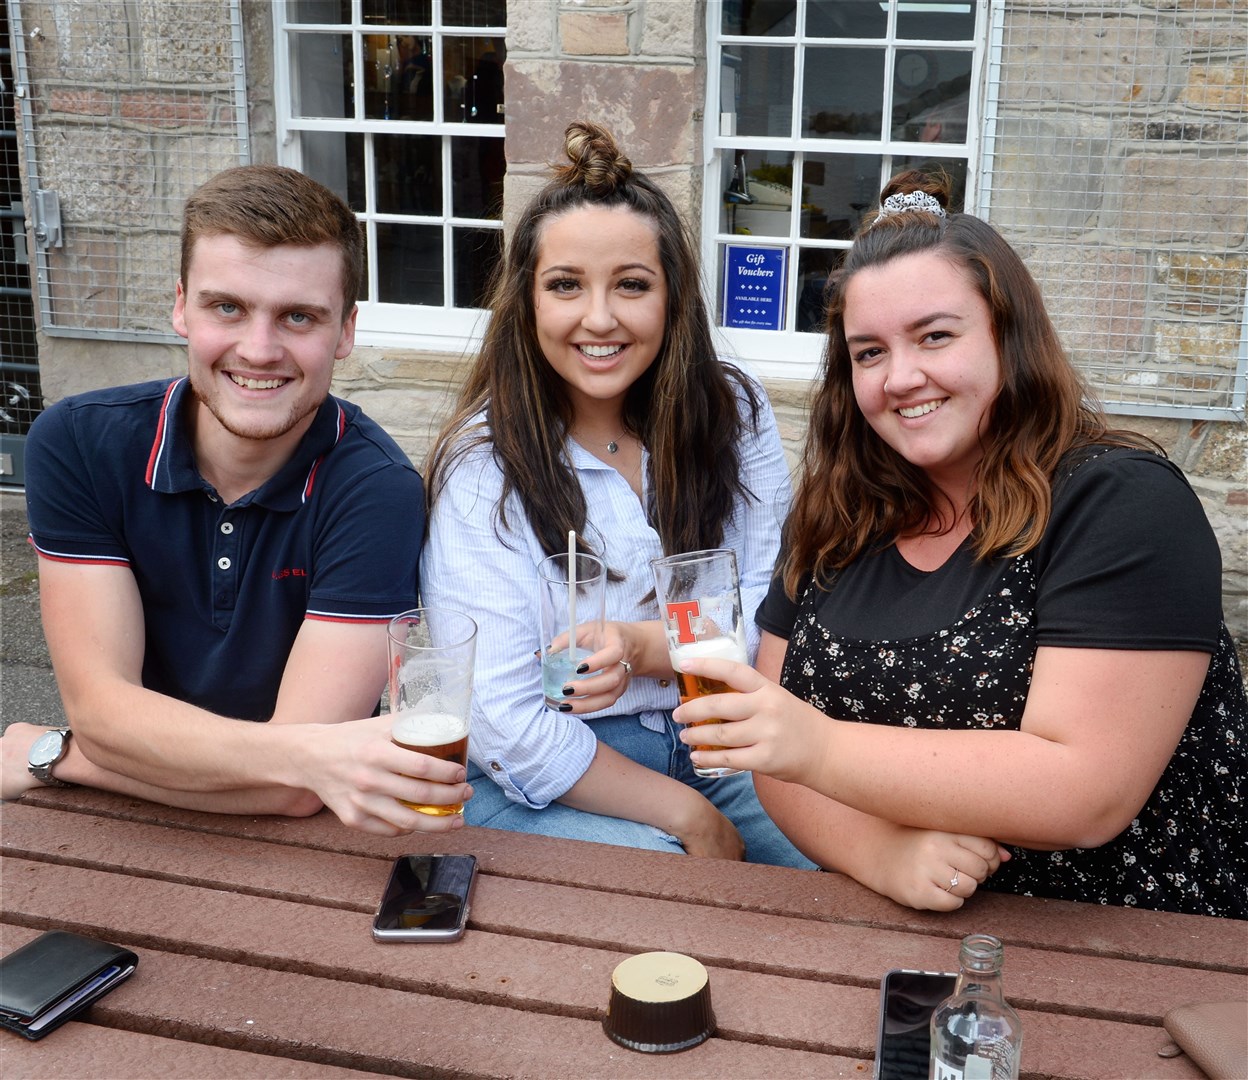 Back when beer gardens began to open up as coronavirus pandemic restrictions started to ease, Gary was there to capture the moment. Enjoying a pint at The Caledonian Dingwall are Kyle Rose, Ally Lamont and Maya Duffy.